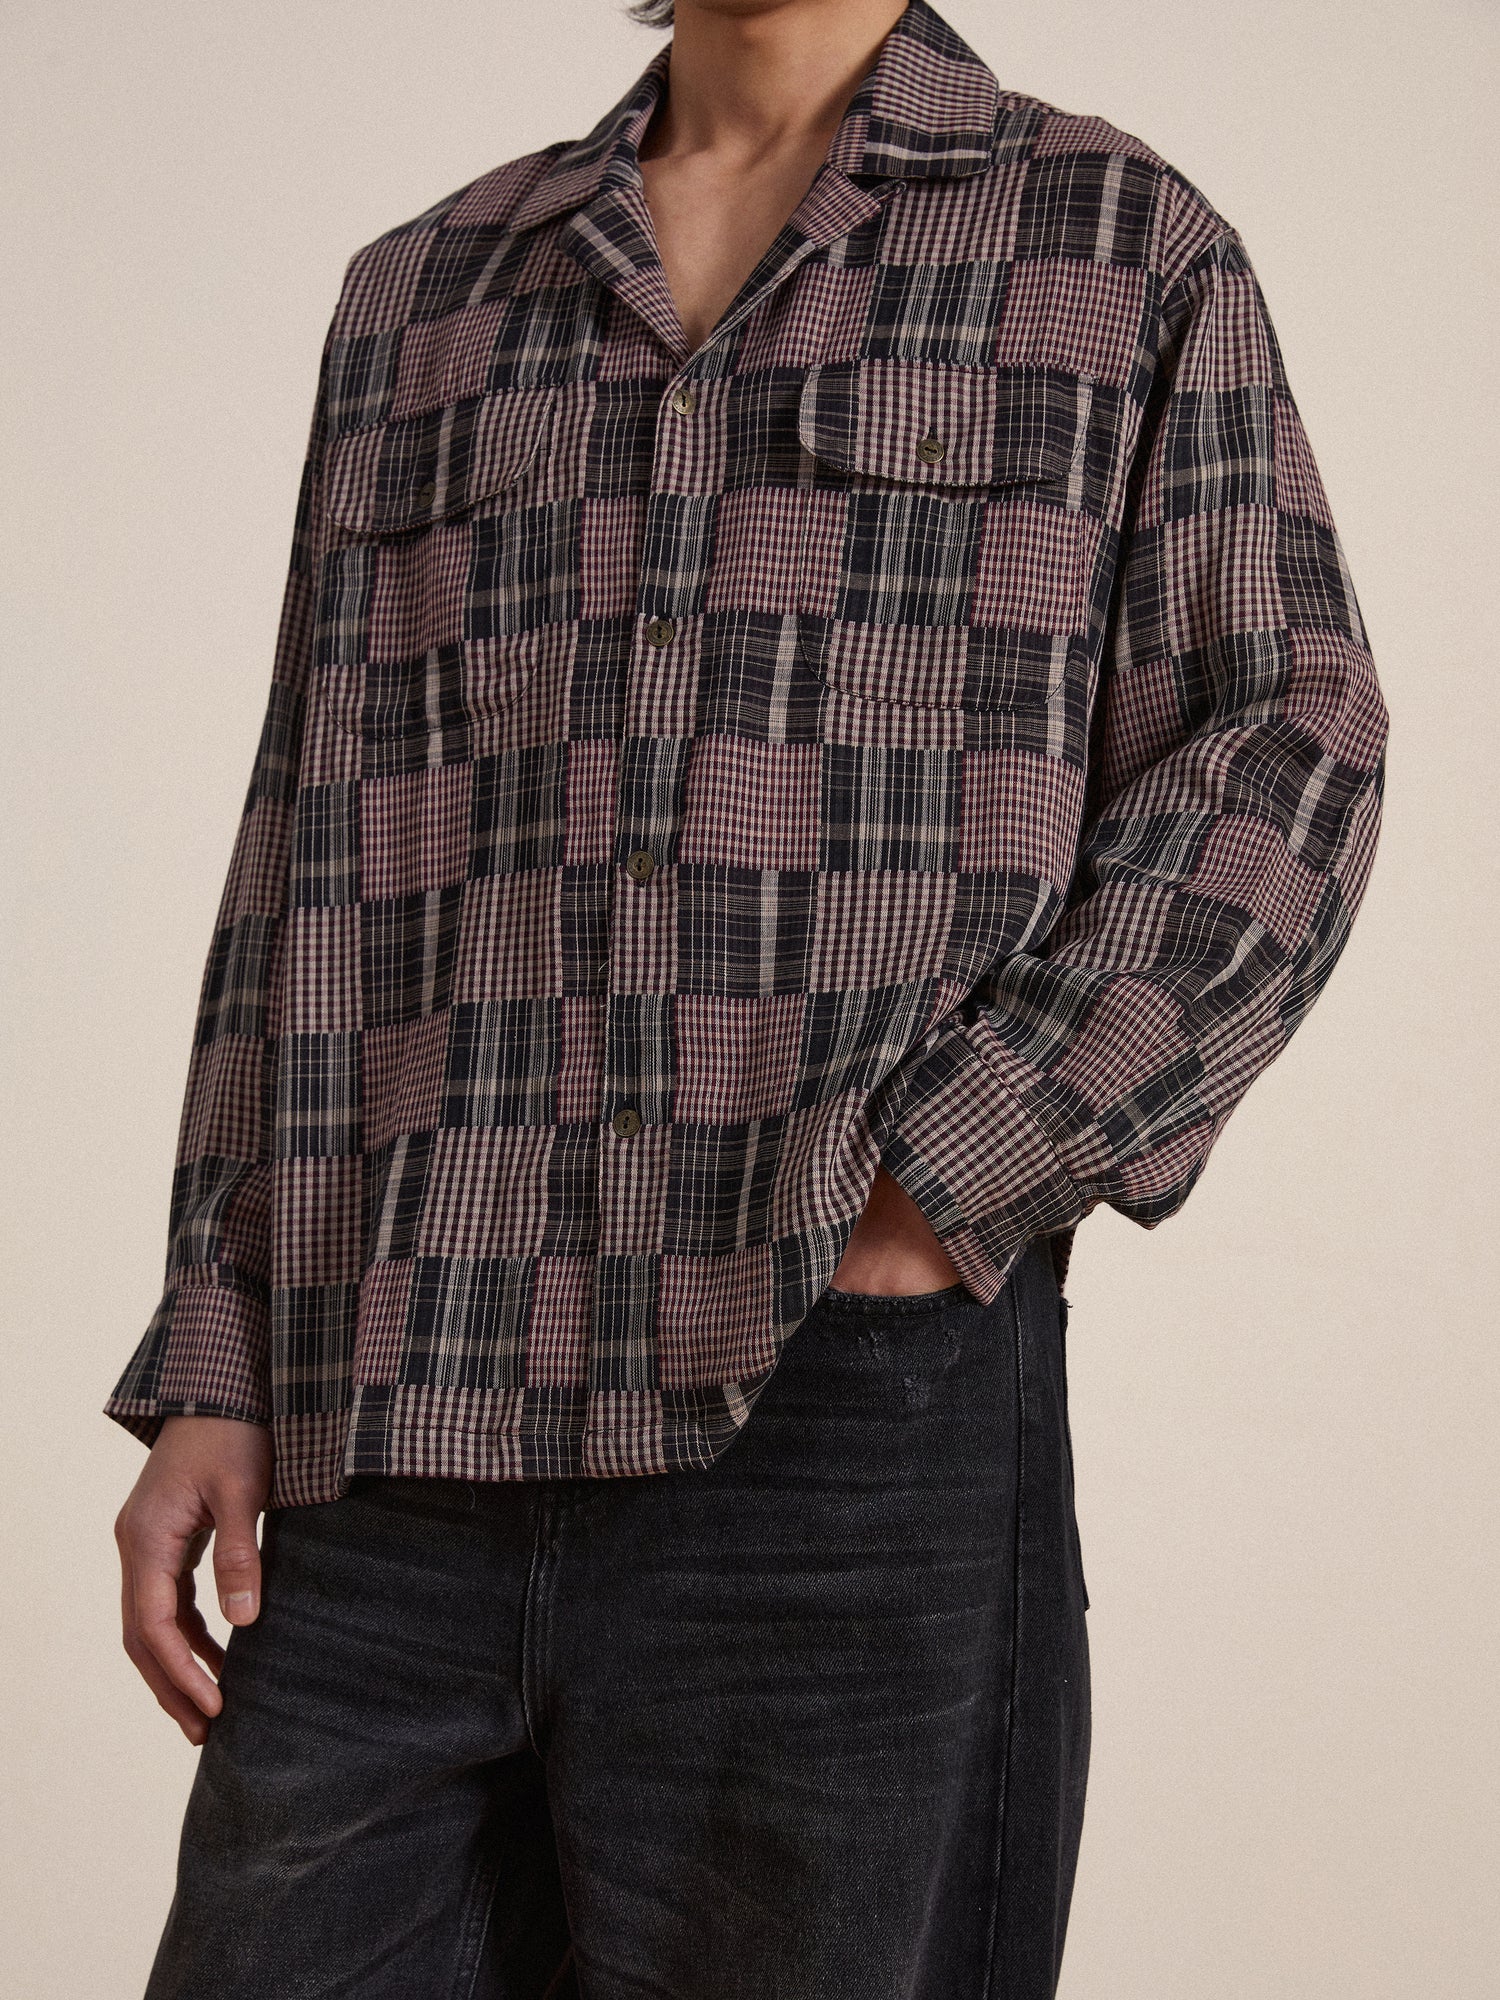 A man wearing a Found Multi-Flannel LS Camp Shirt and jeans.